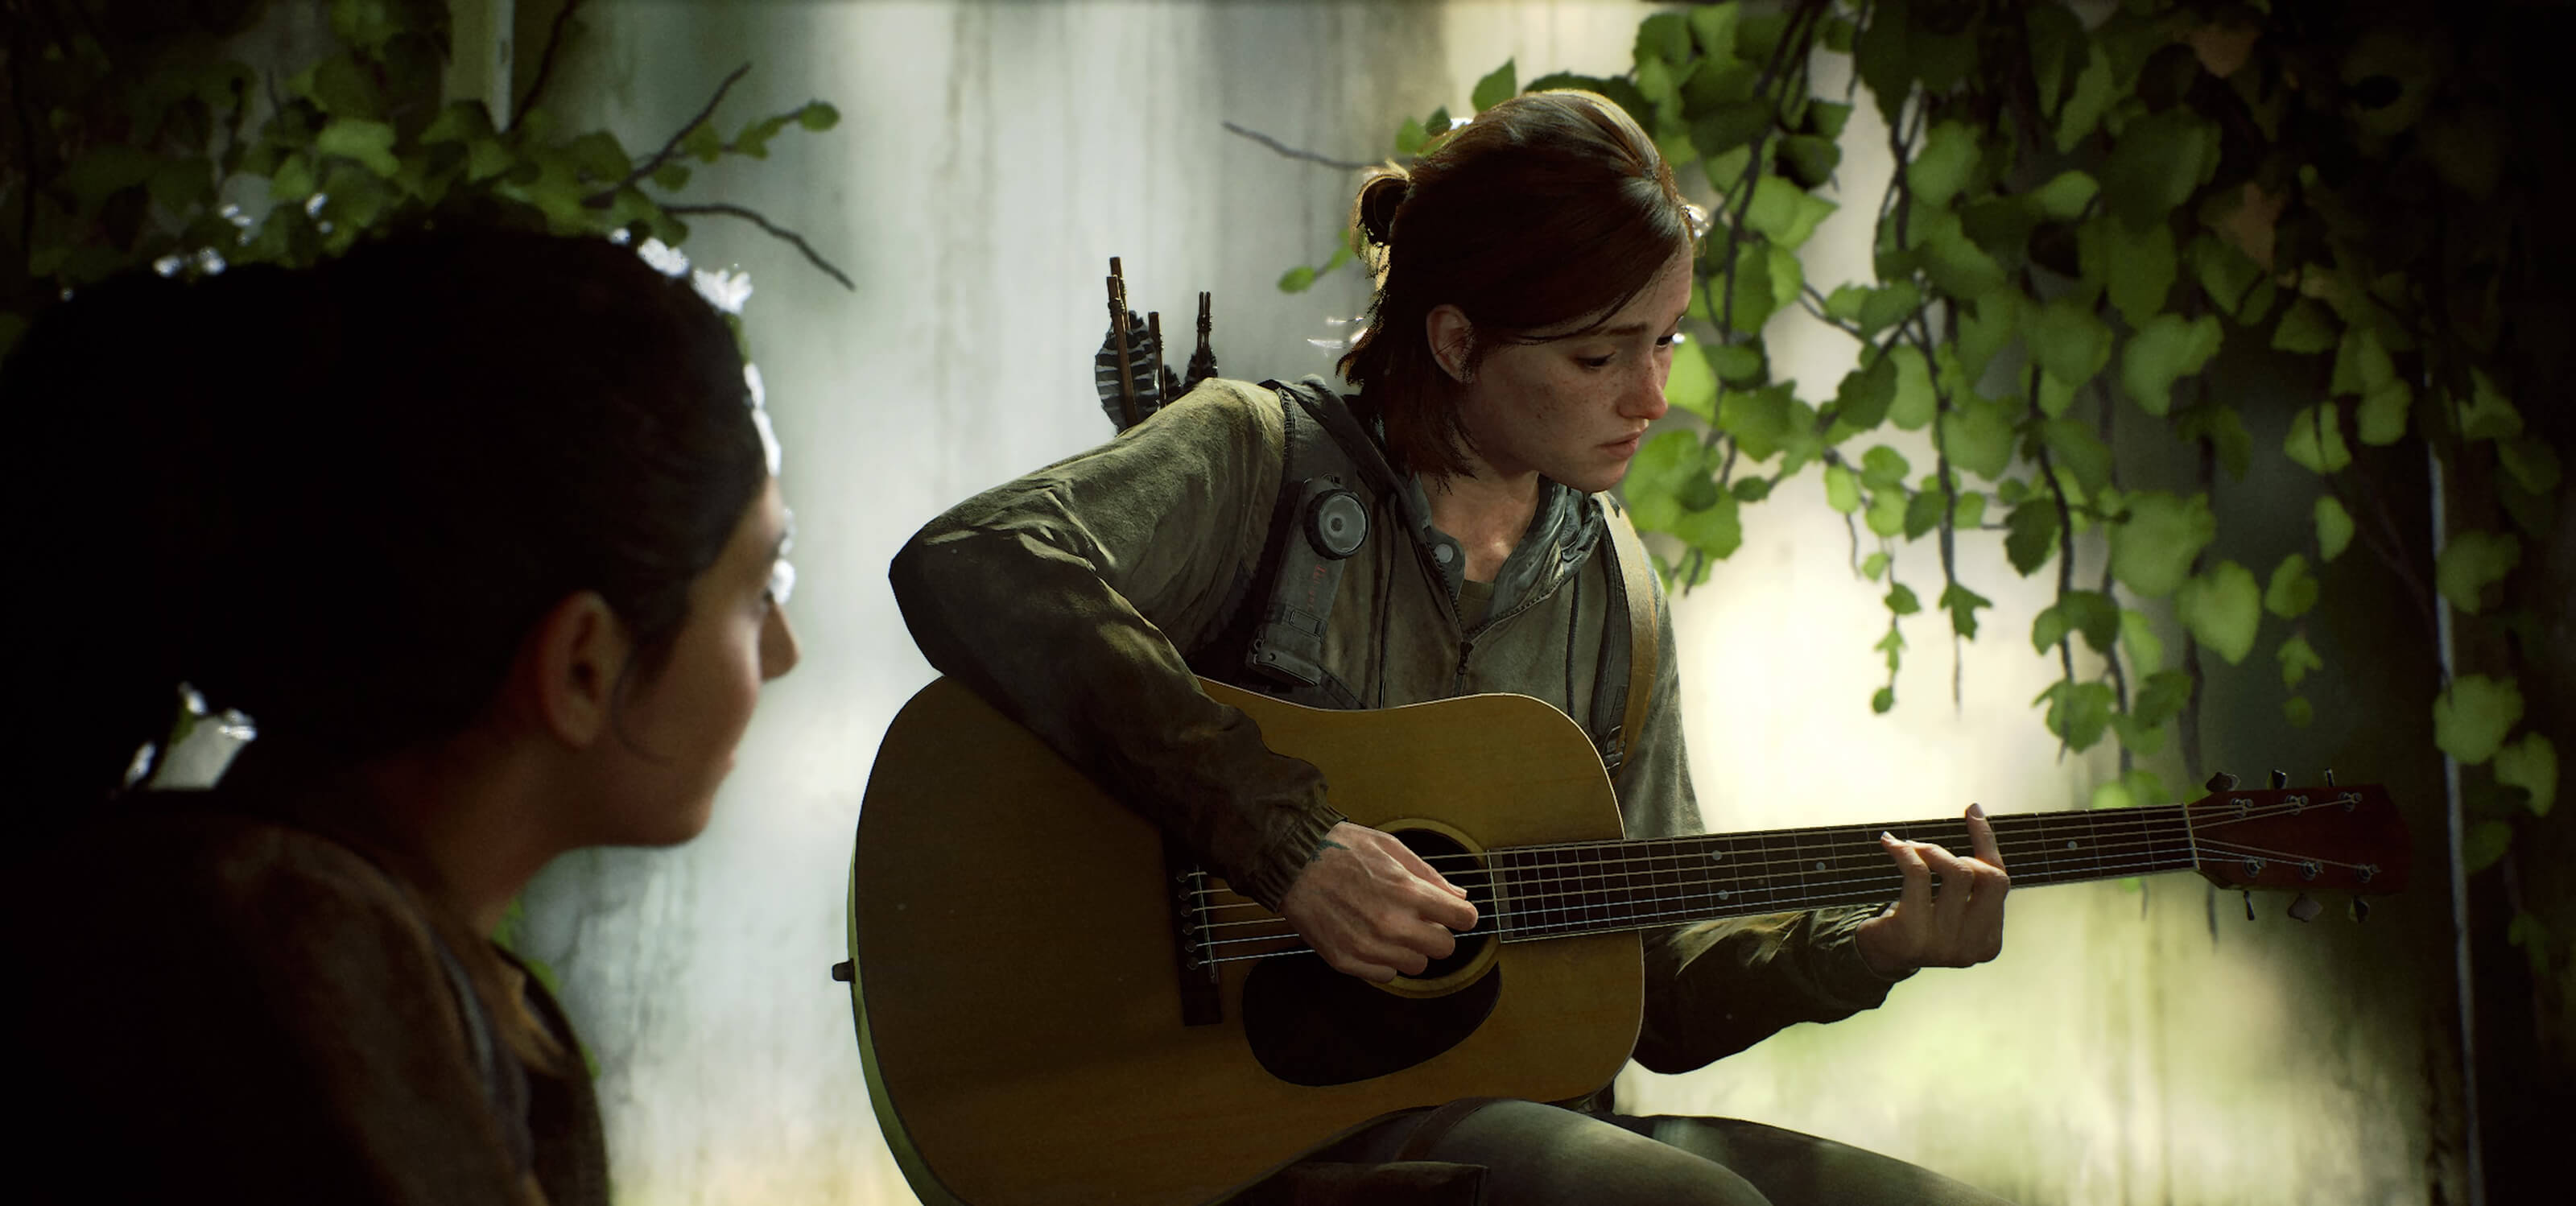 Ellie plays guitar as another woman watches